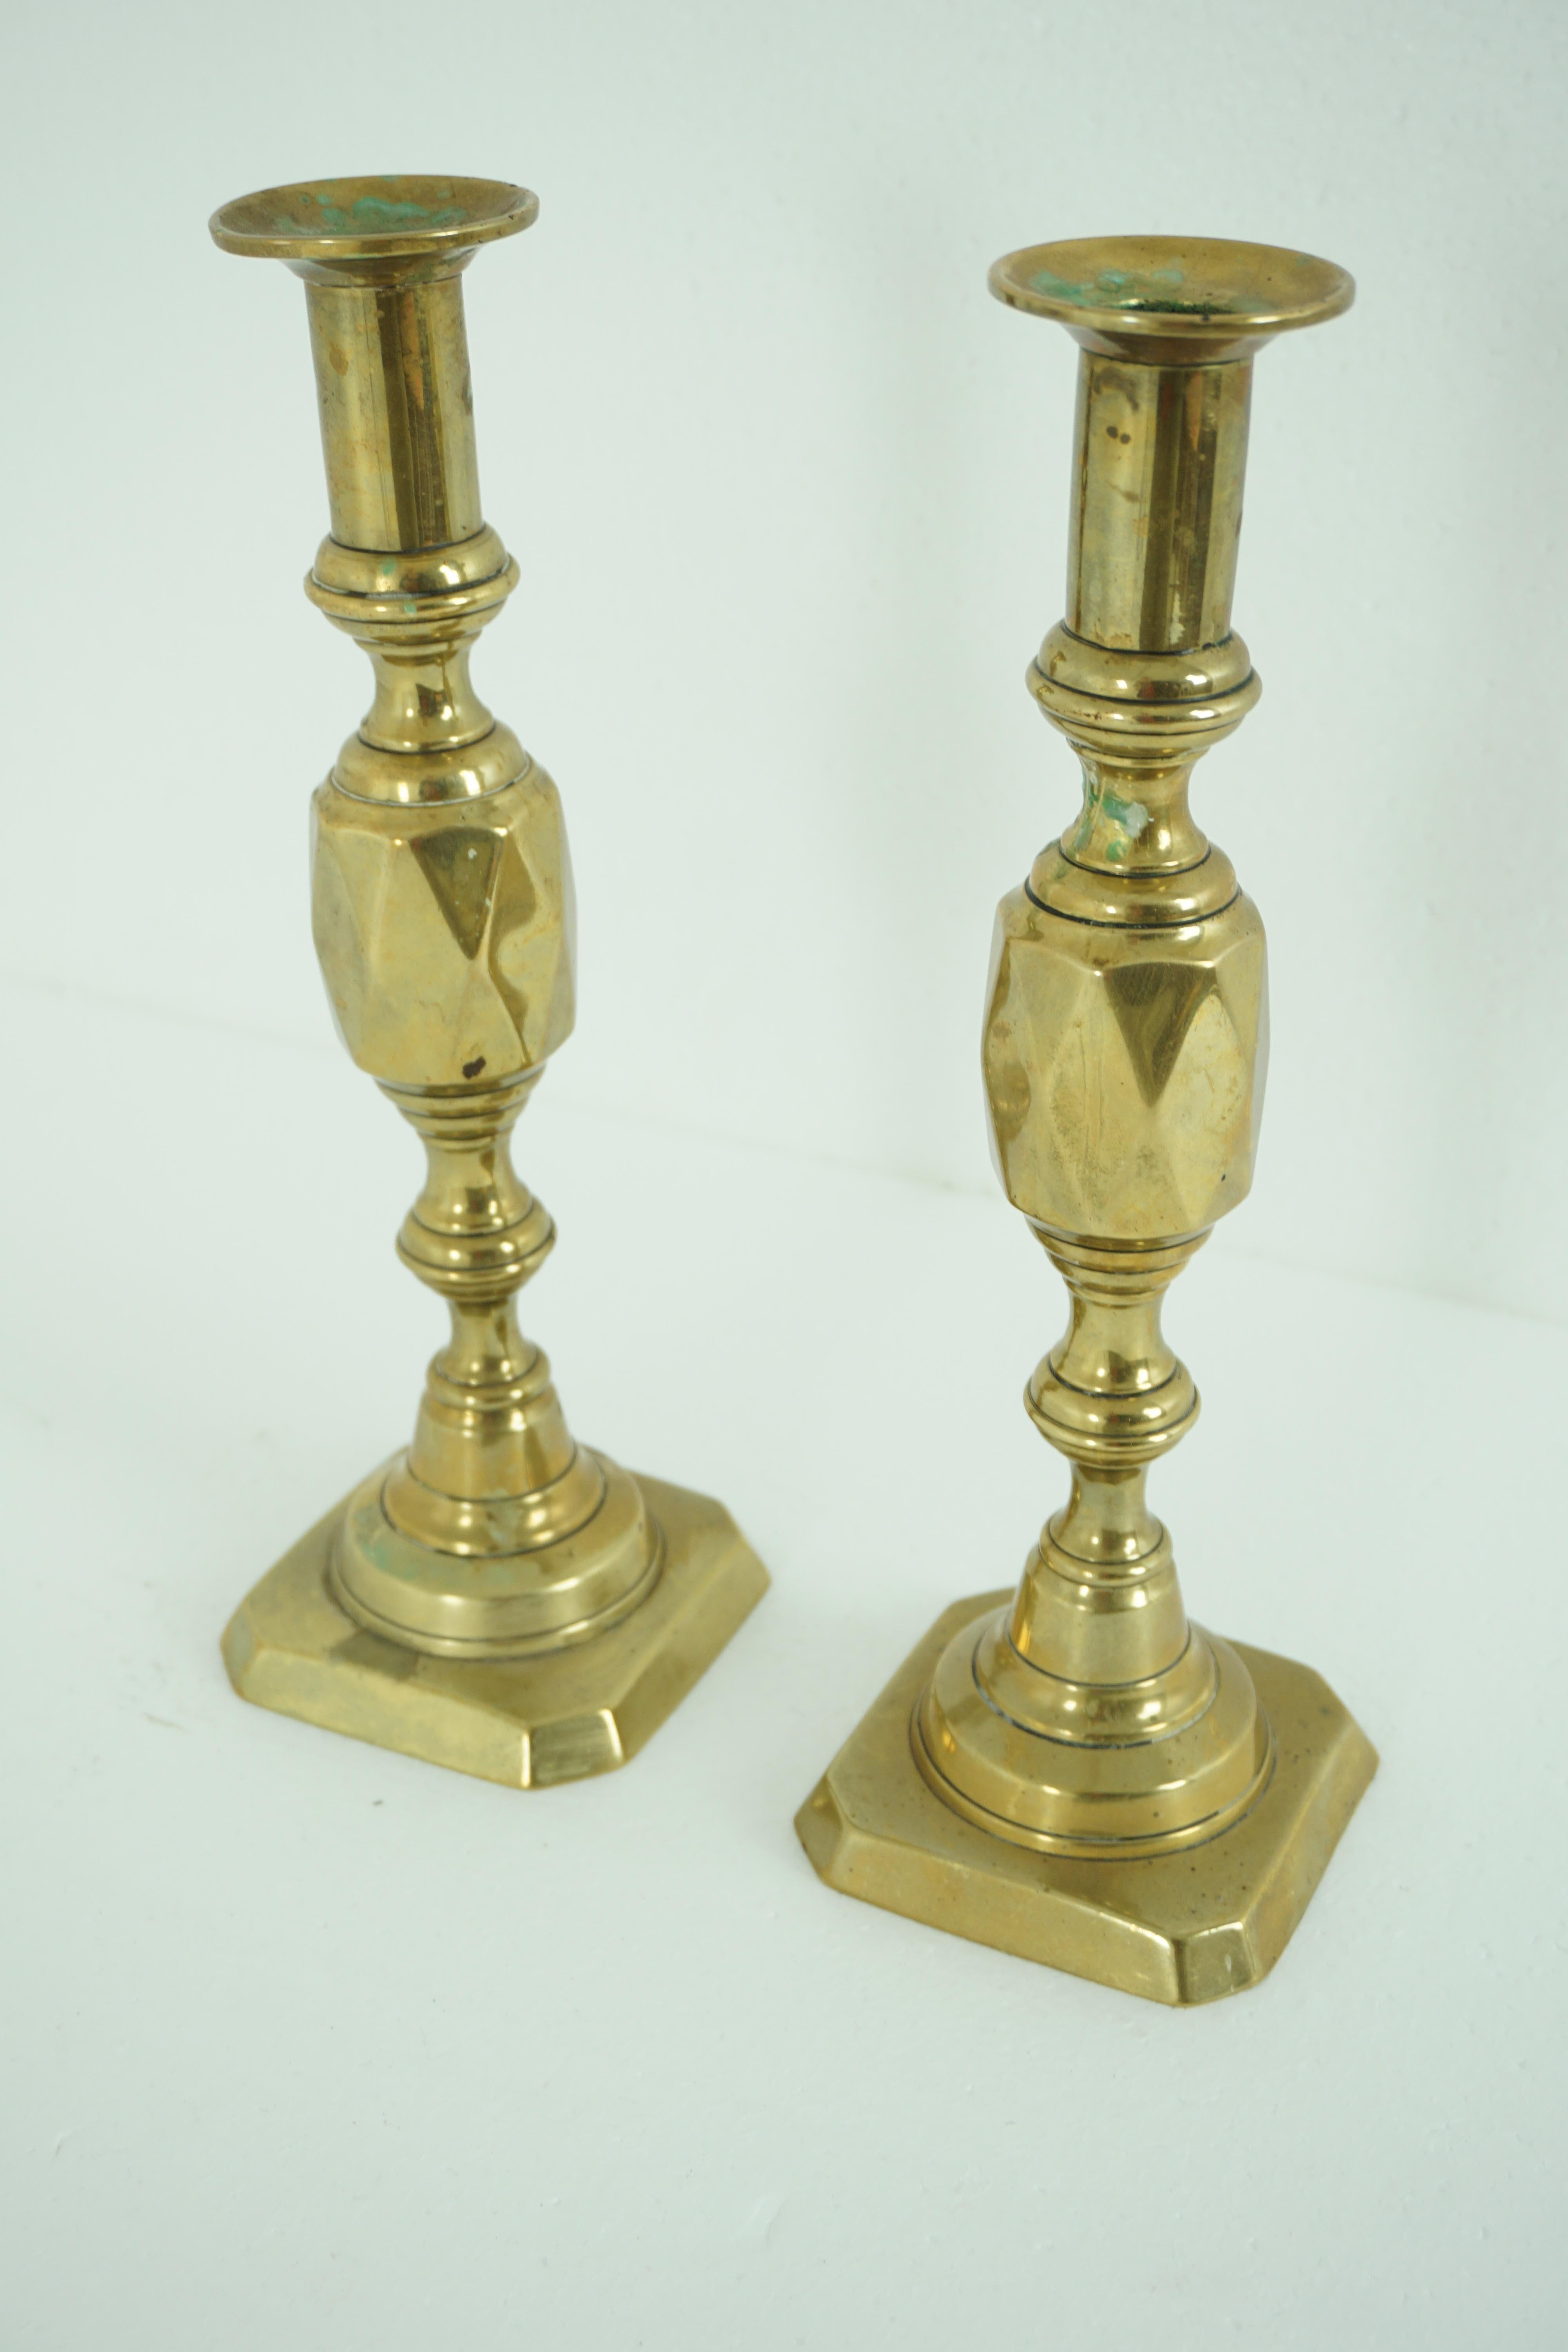 Pair of antique Victorian brass diamond shaped candlesticks, Scotland, 1890, 1951

Scotland,

1890

These were produced to commemorate Queen Victoria's Diamond Jubilee
Comes with ejectors
Nice condition, no repairs
Sit straight

$135 for